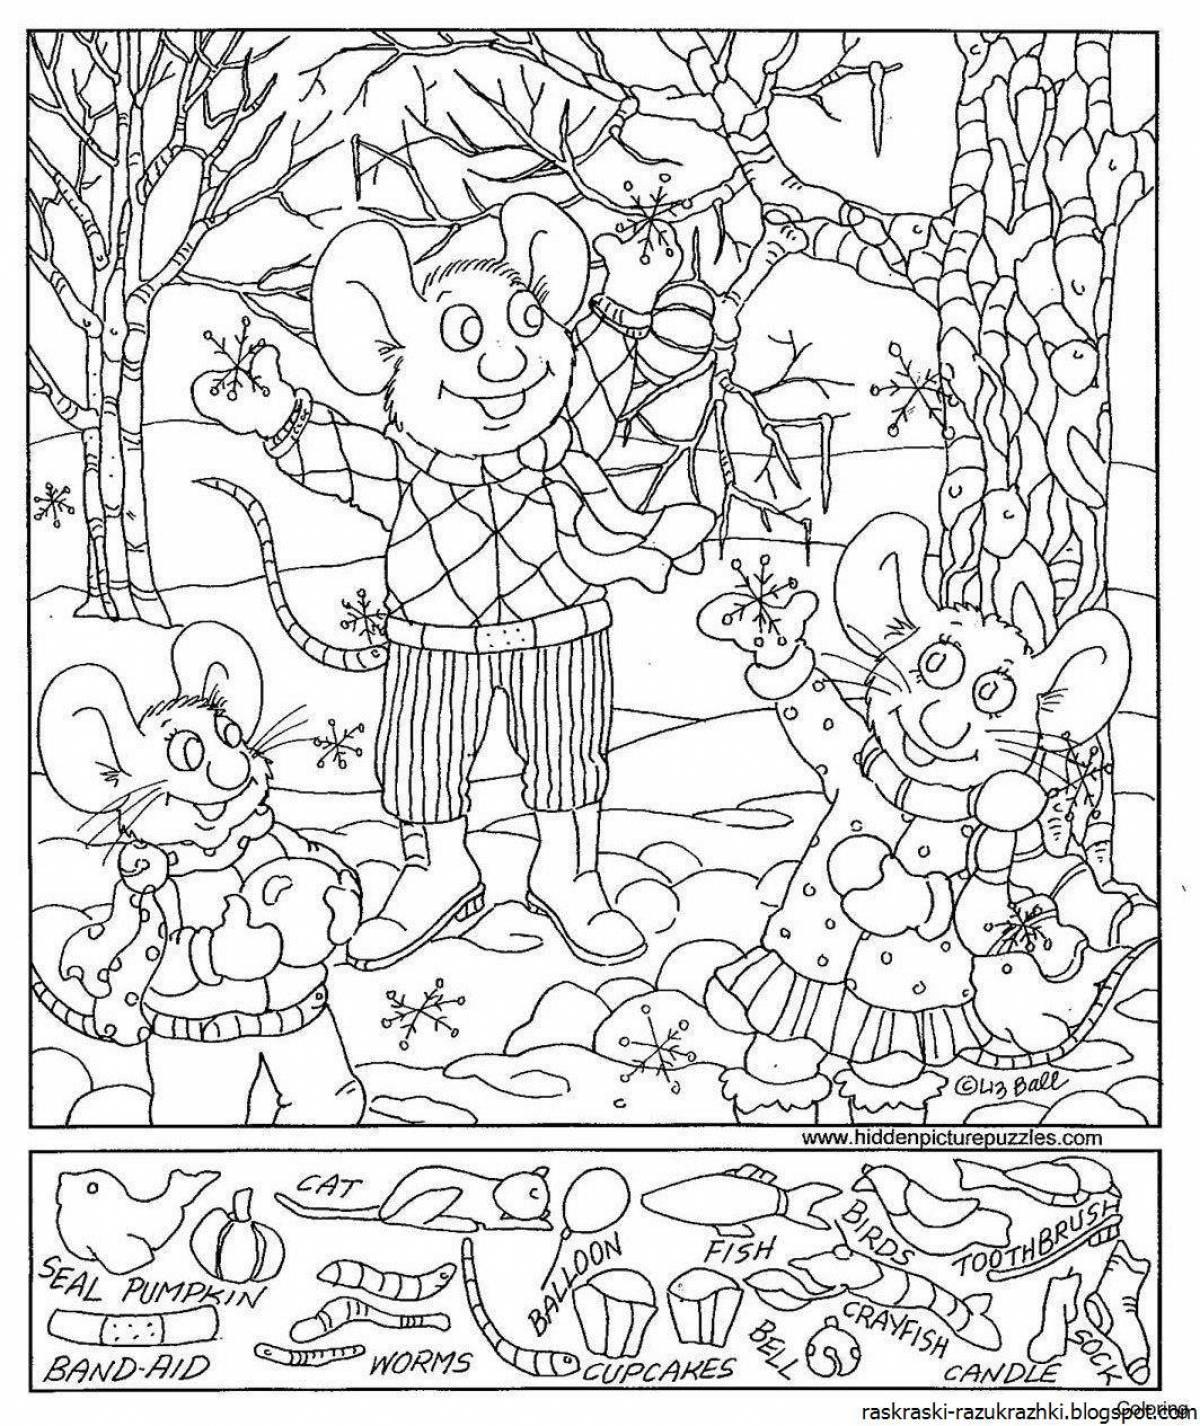 Find the coloring #2